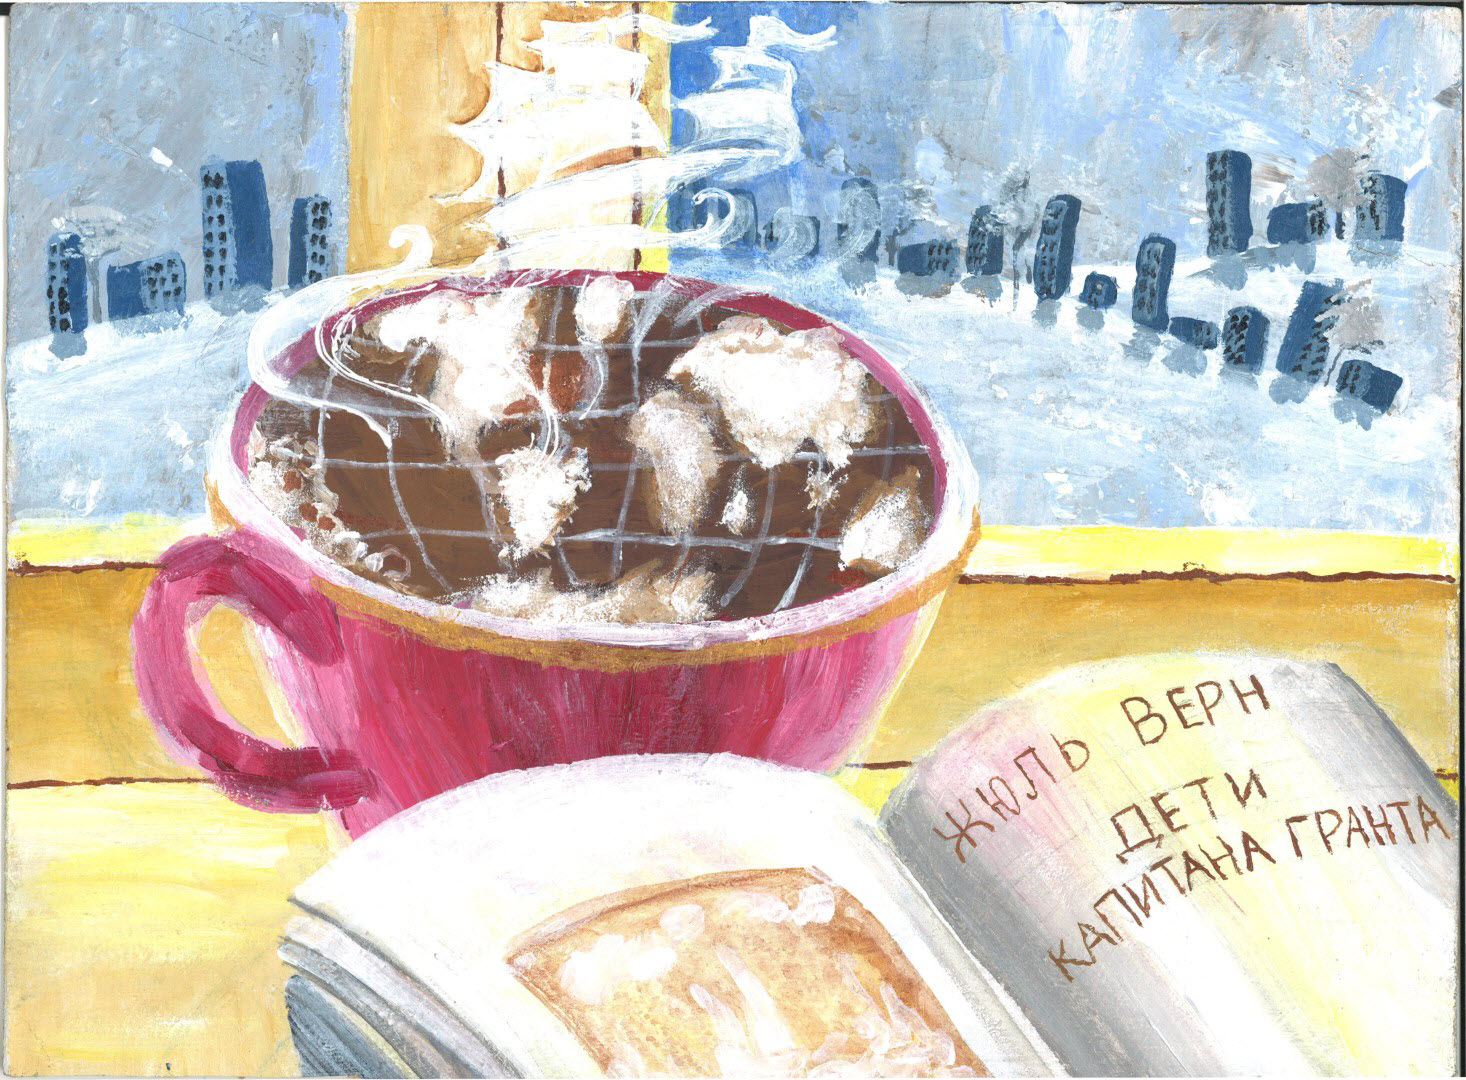 Shows the continents in a cup of coffee, with a book, window